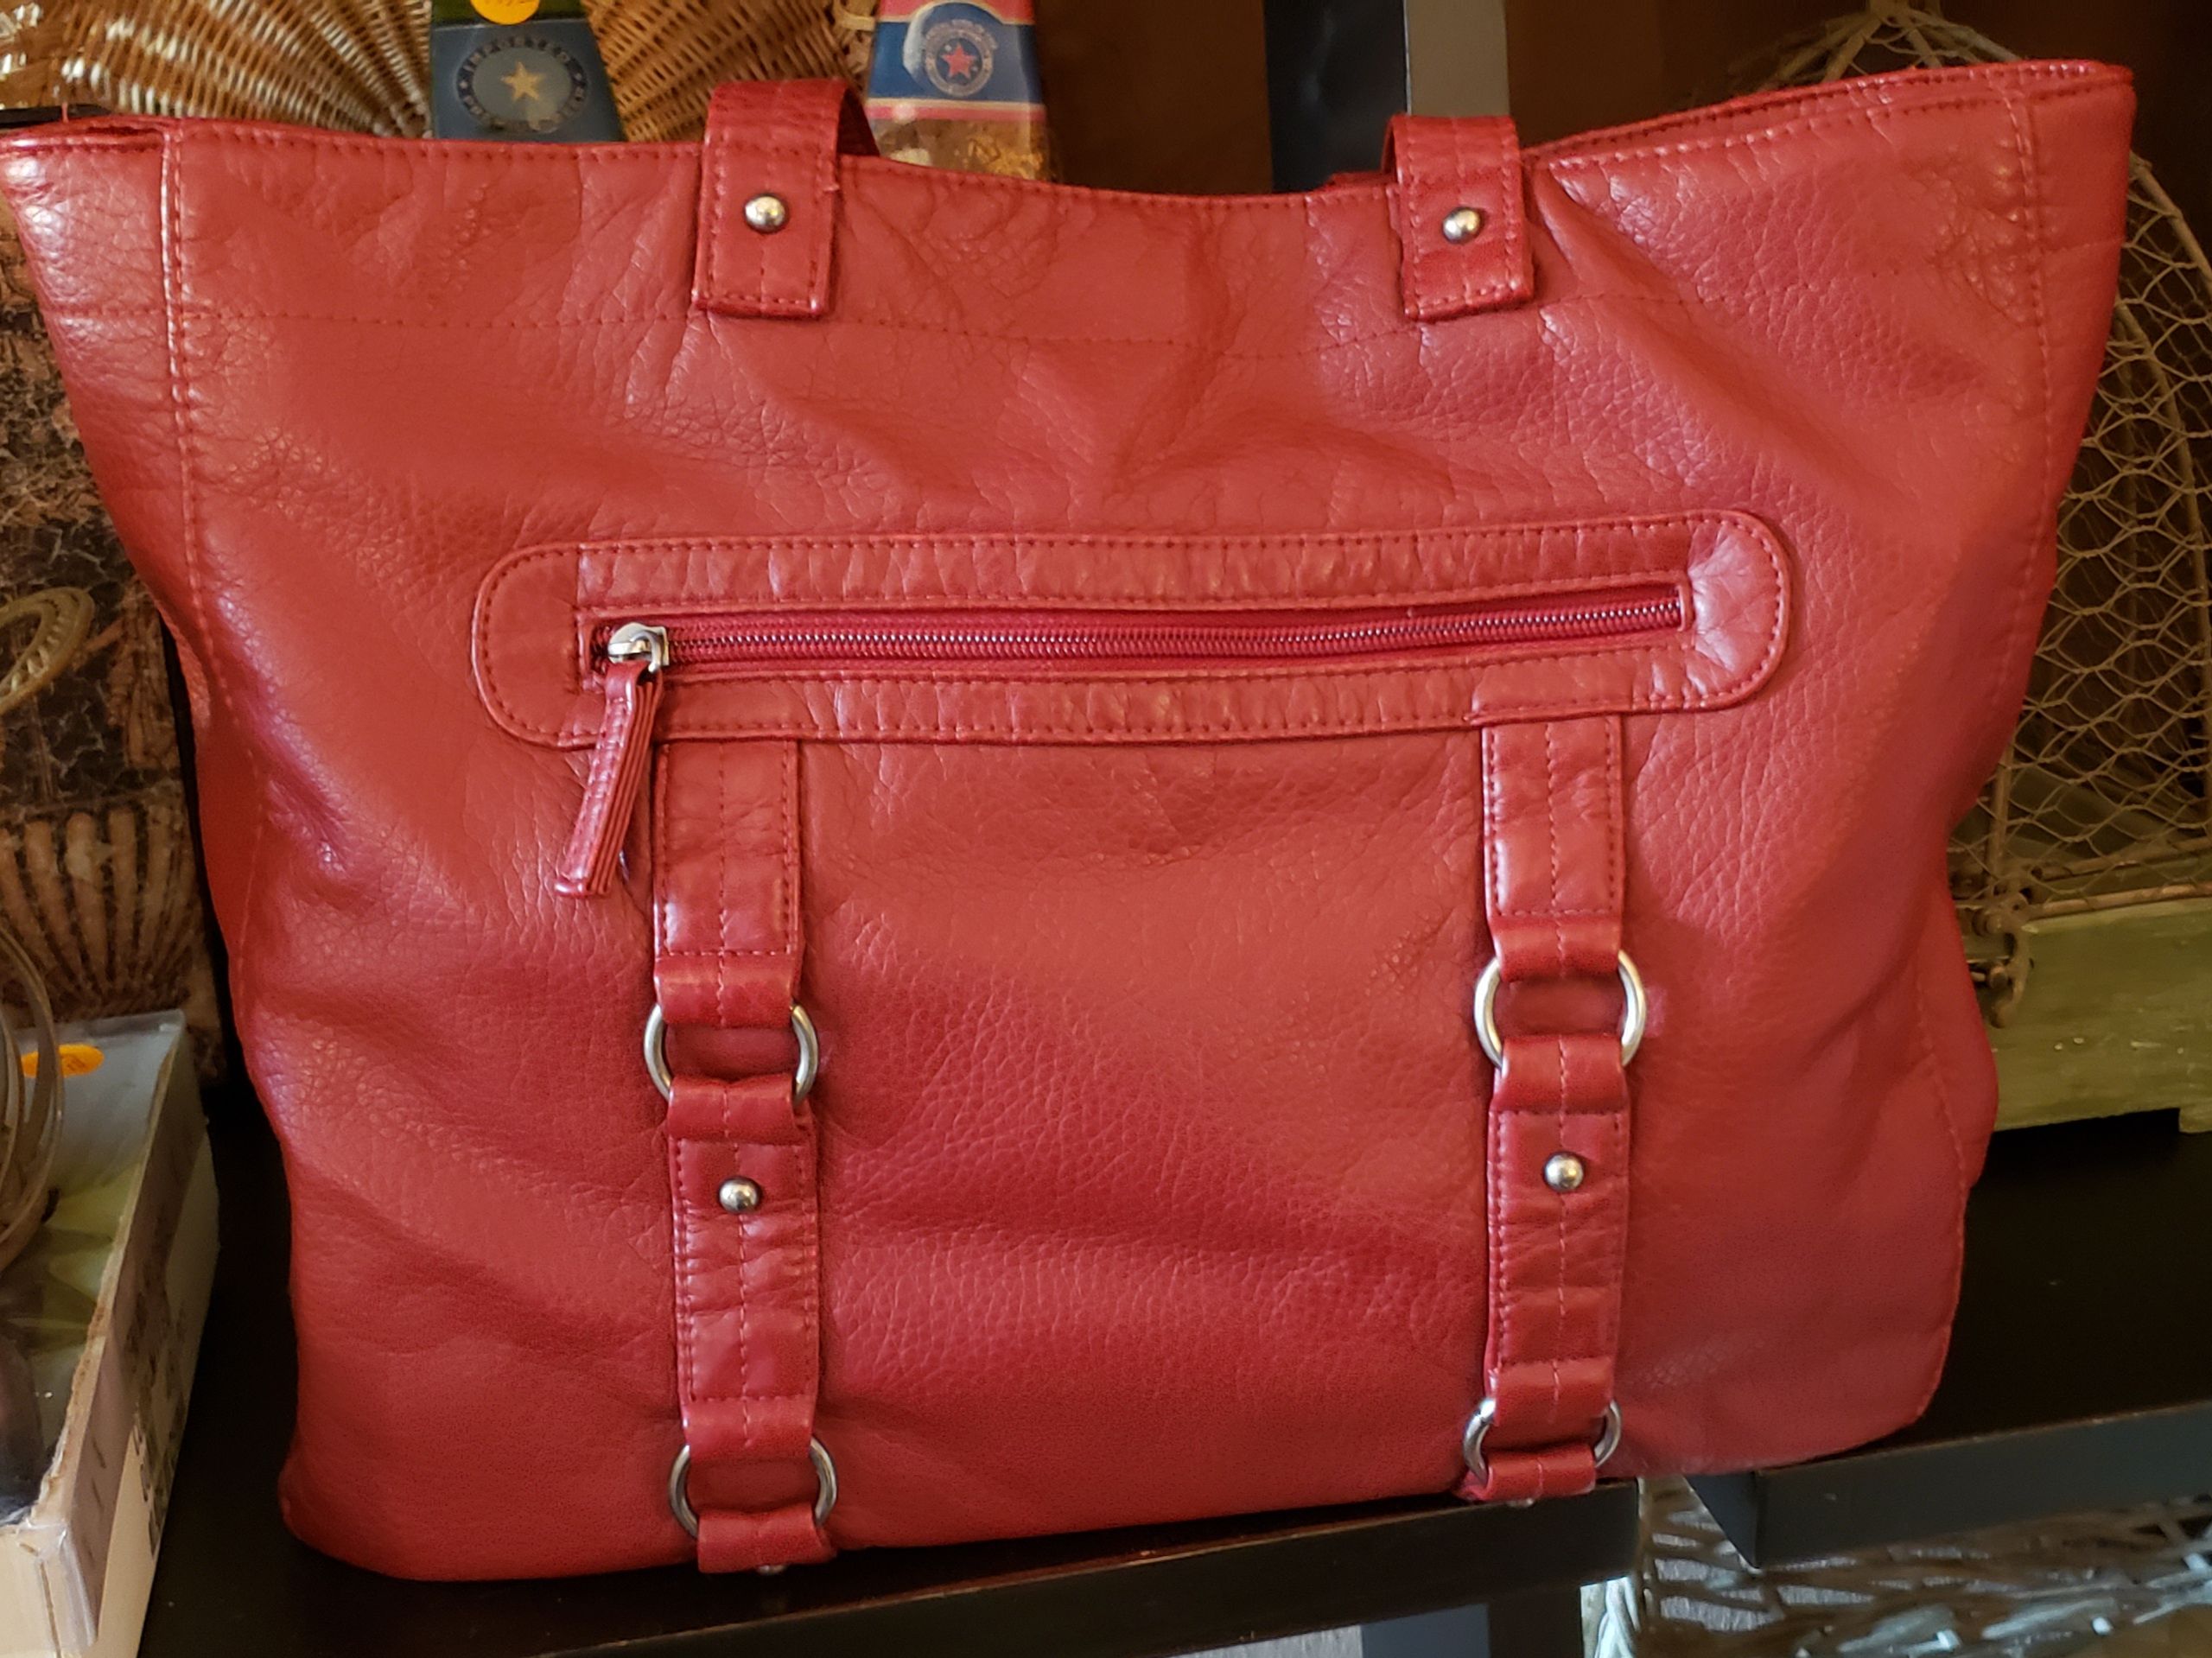 Nice soft red tote/handbag/shoulder bag. Open center with snap close ...12t, 14w, 3d, 12 in strap drop